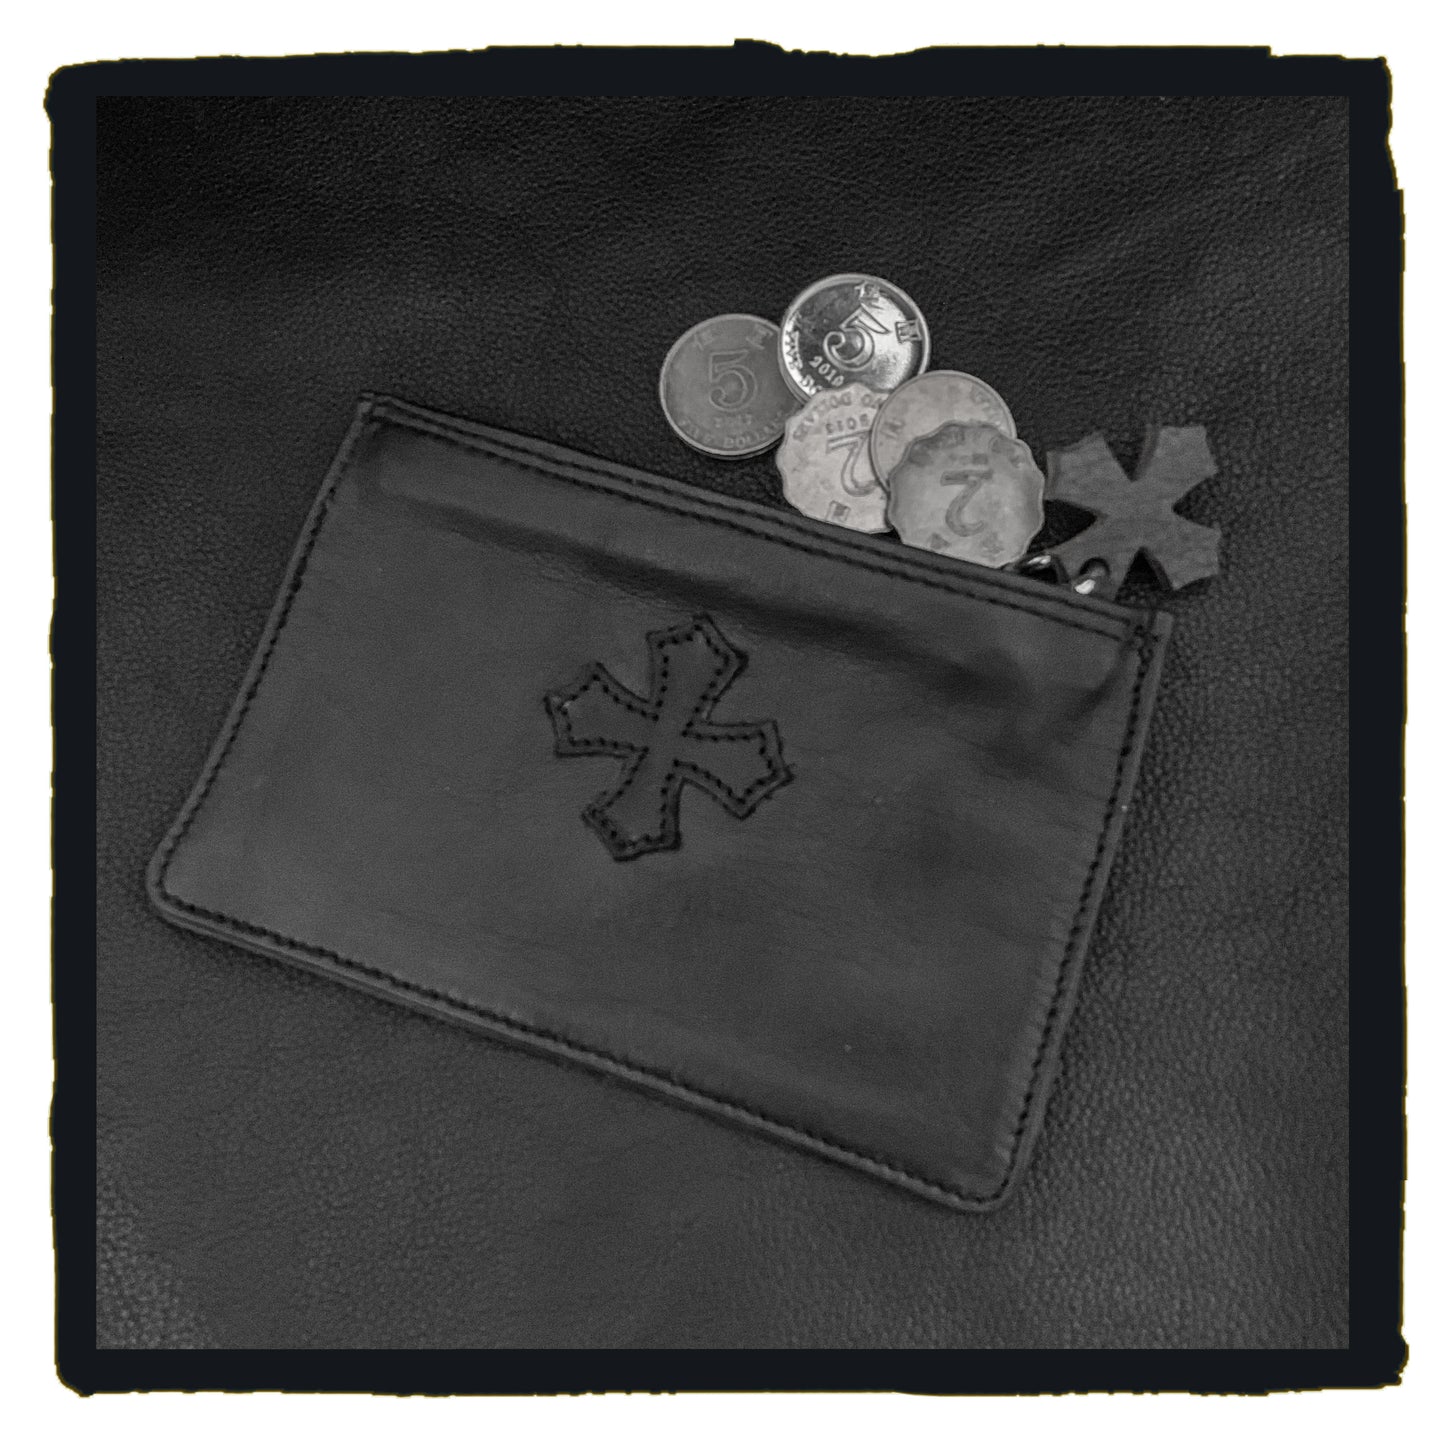 New arrival - leather maltese purse wallet